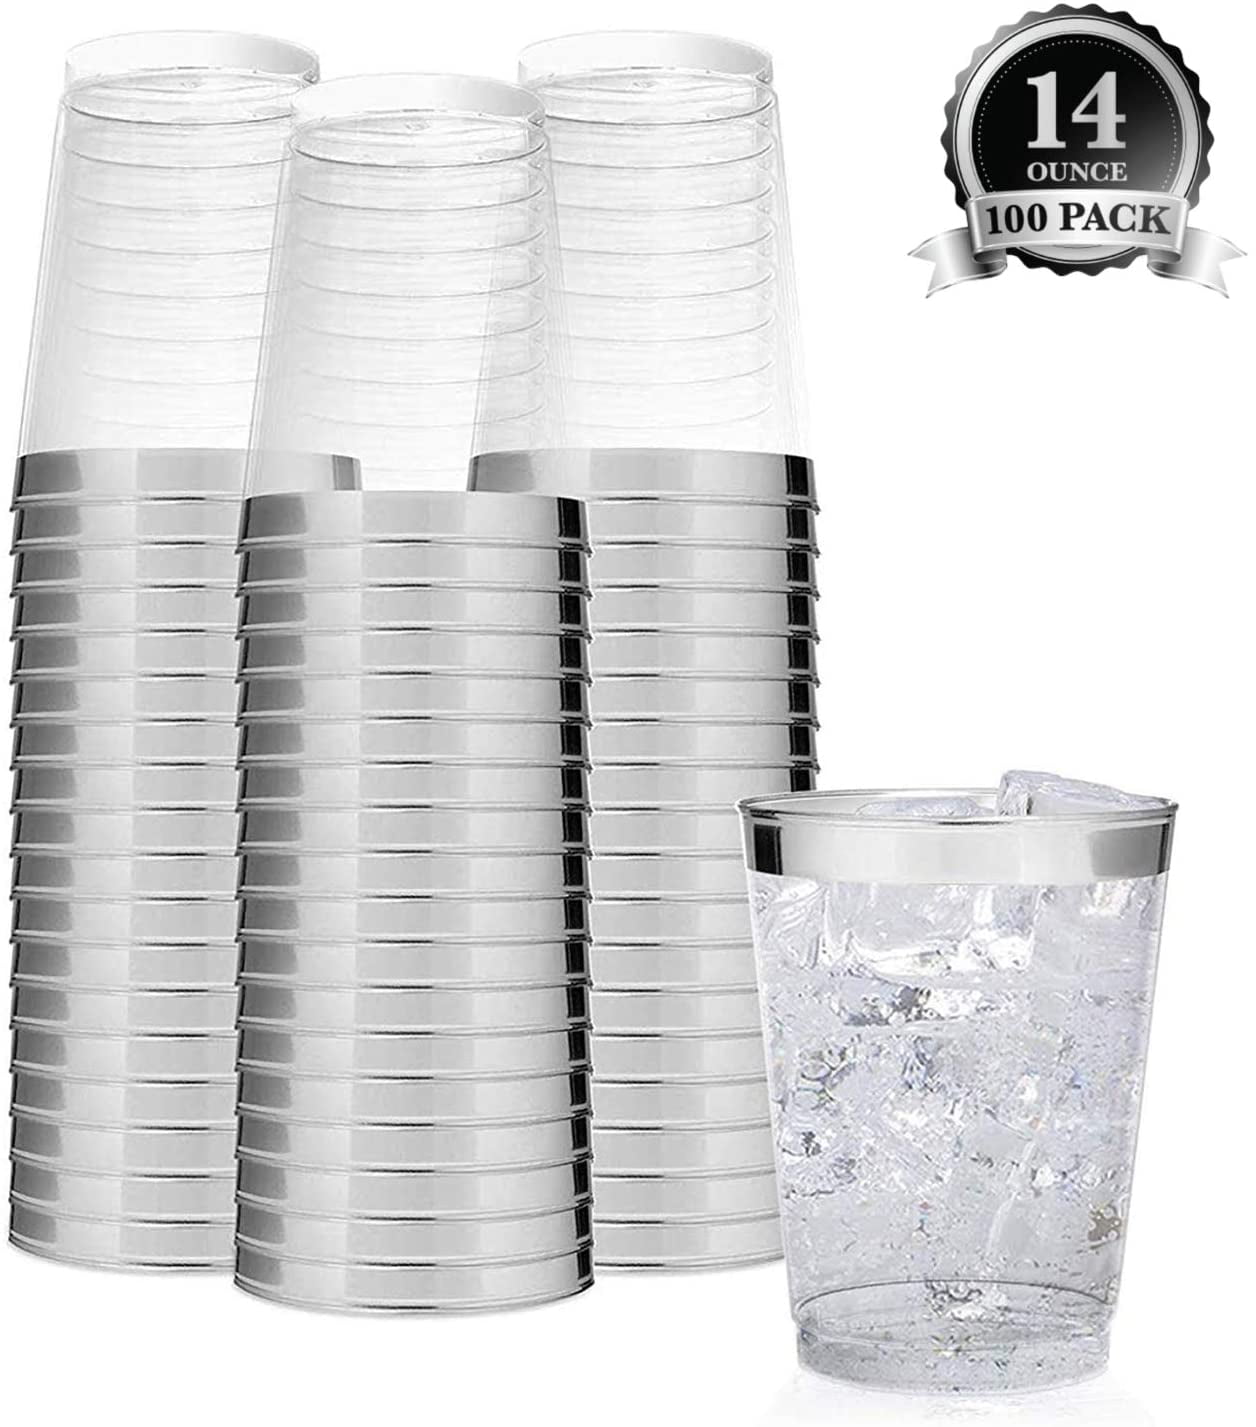 Stock Your Home 9 oz Hard Plastic Party Cups 100 Pack Gold Rim 